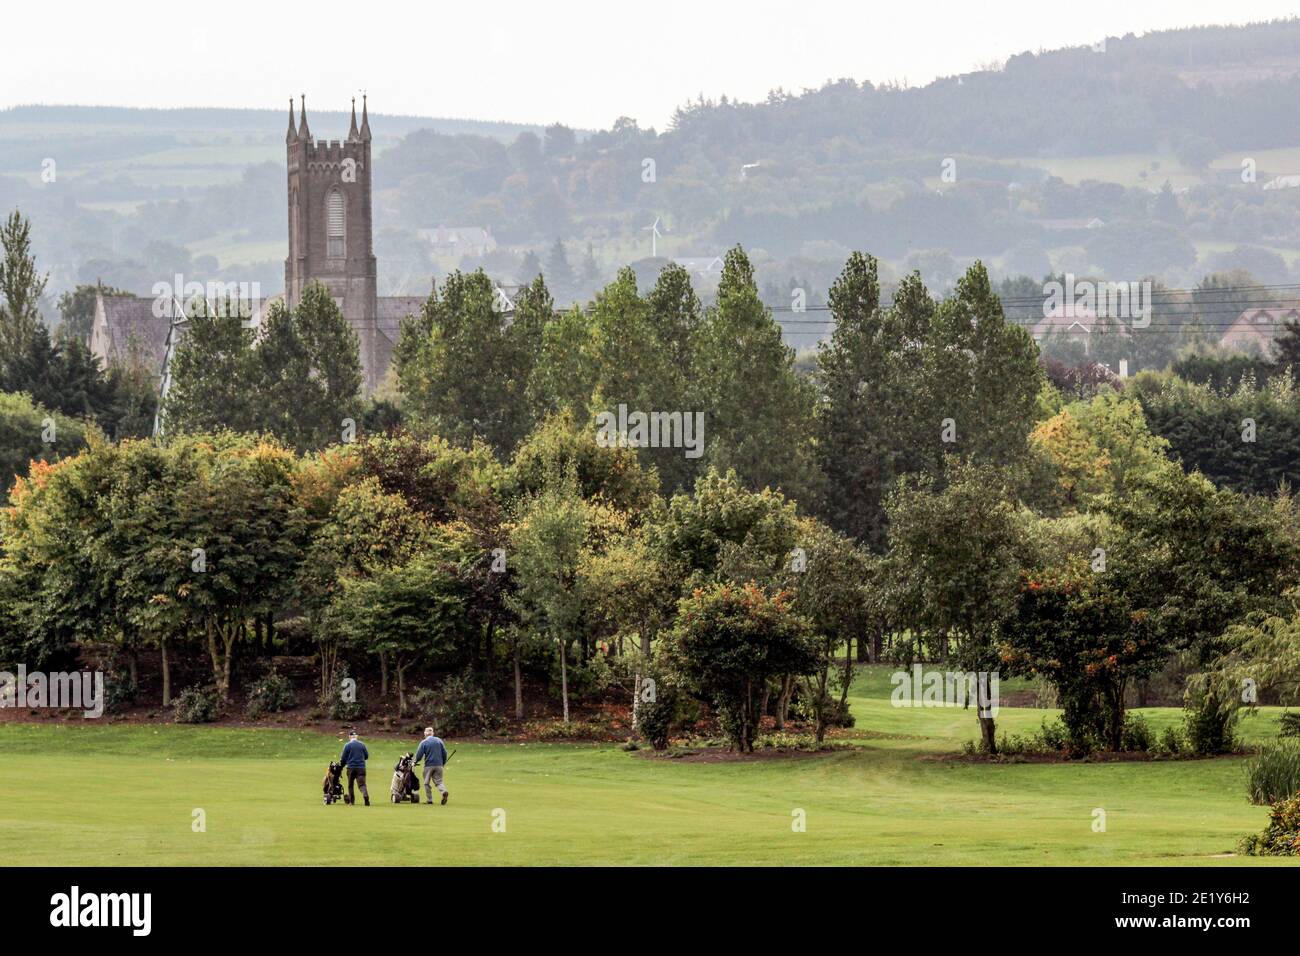 Two golfers on golf course with Roman Catholic Church in the background in Dublin, Ireland Stock Photo